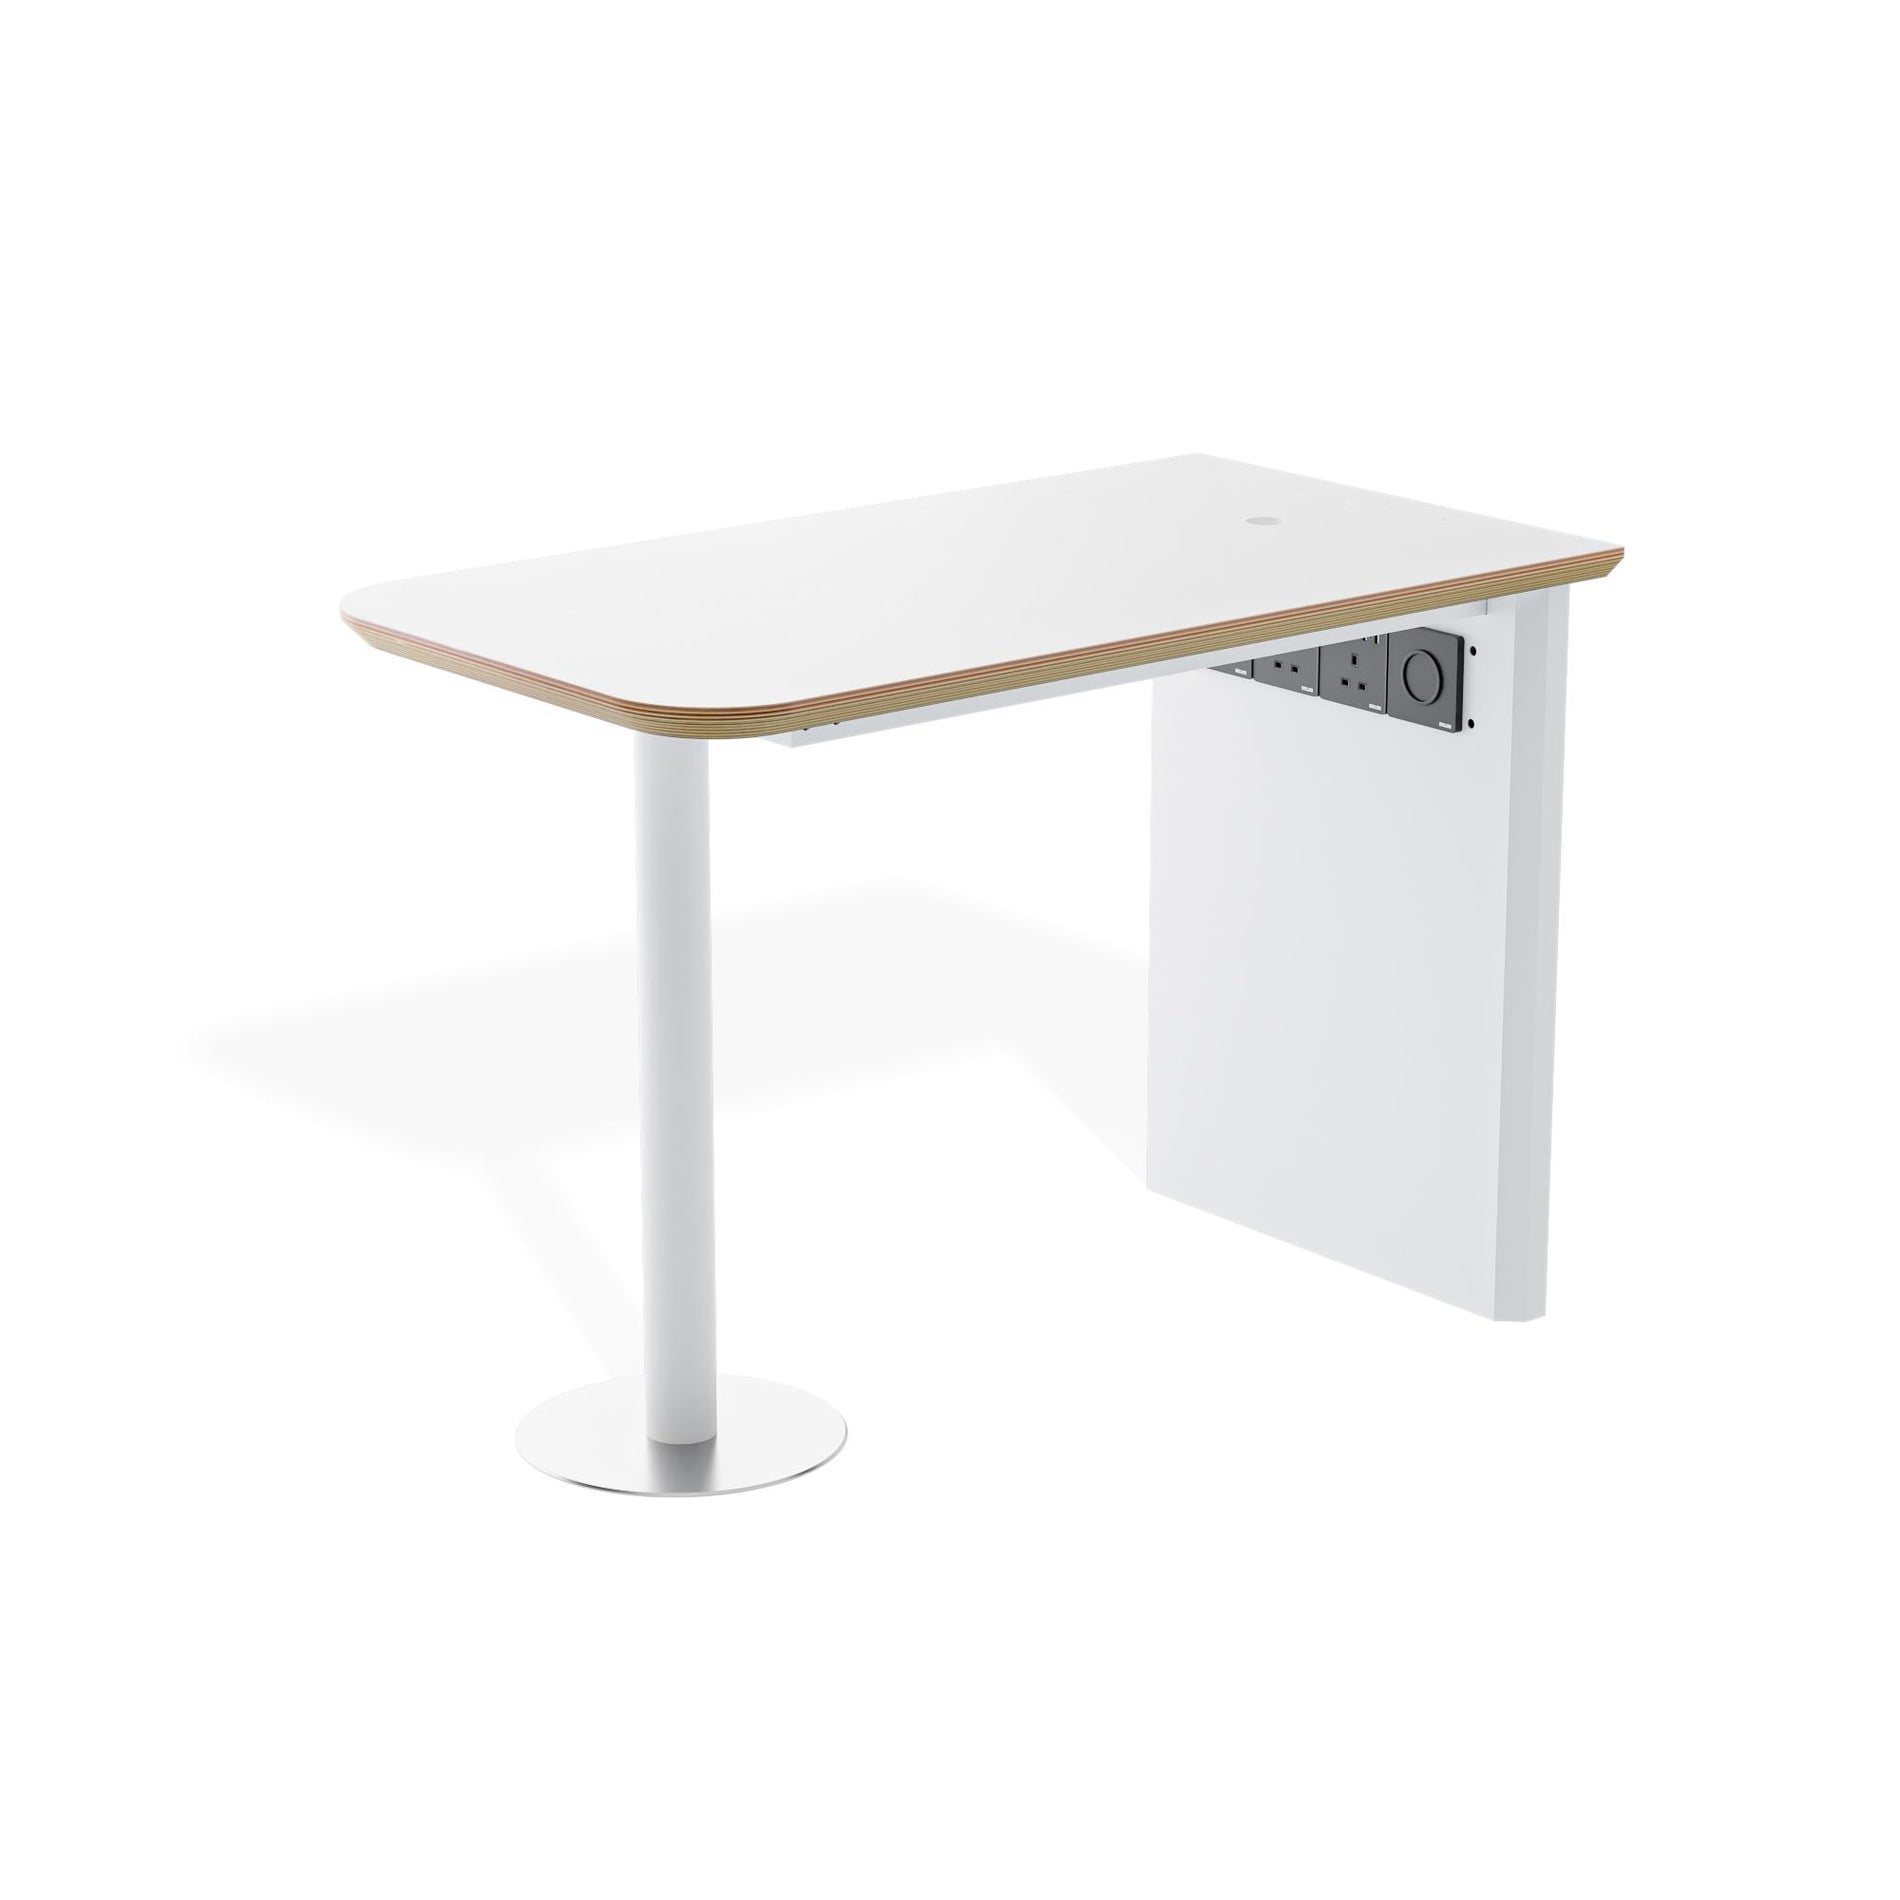 Quell - Meble Meeting Pod - 4 osoboweTable